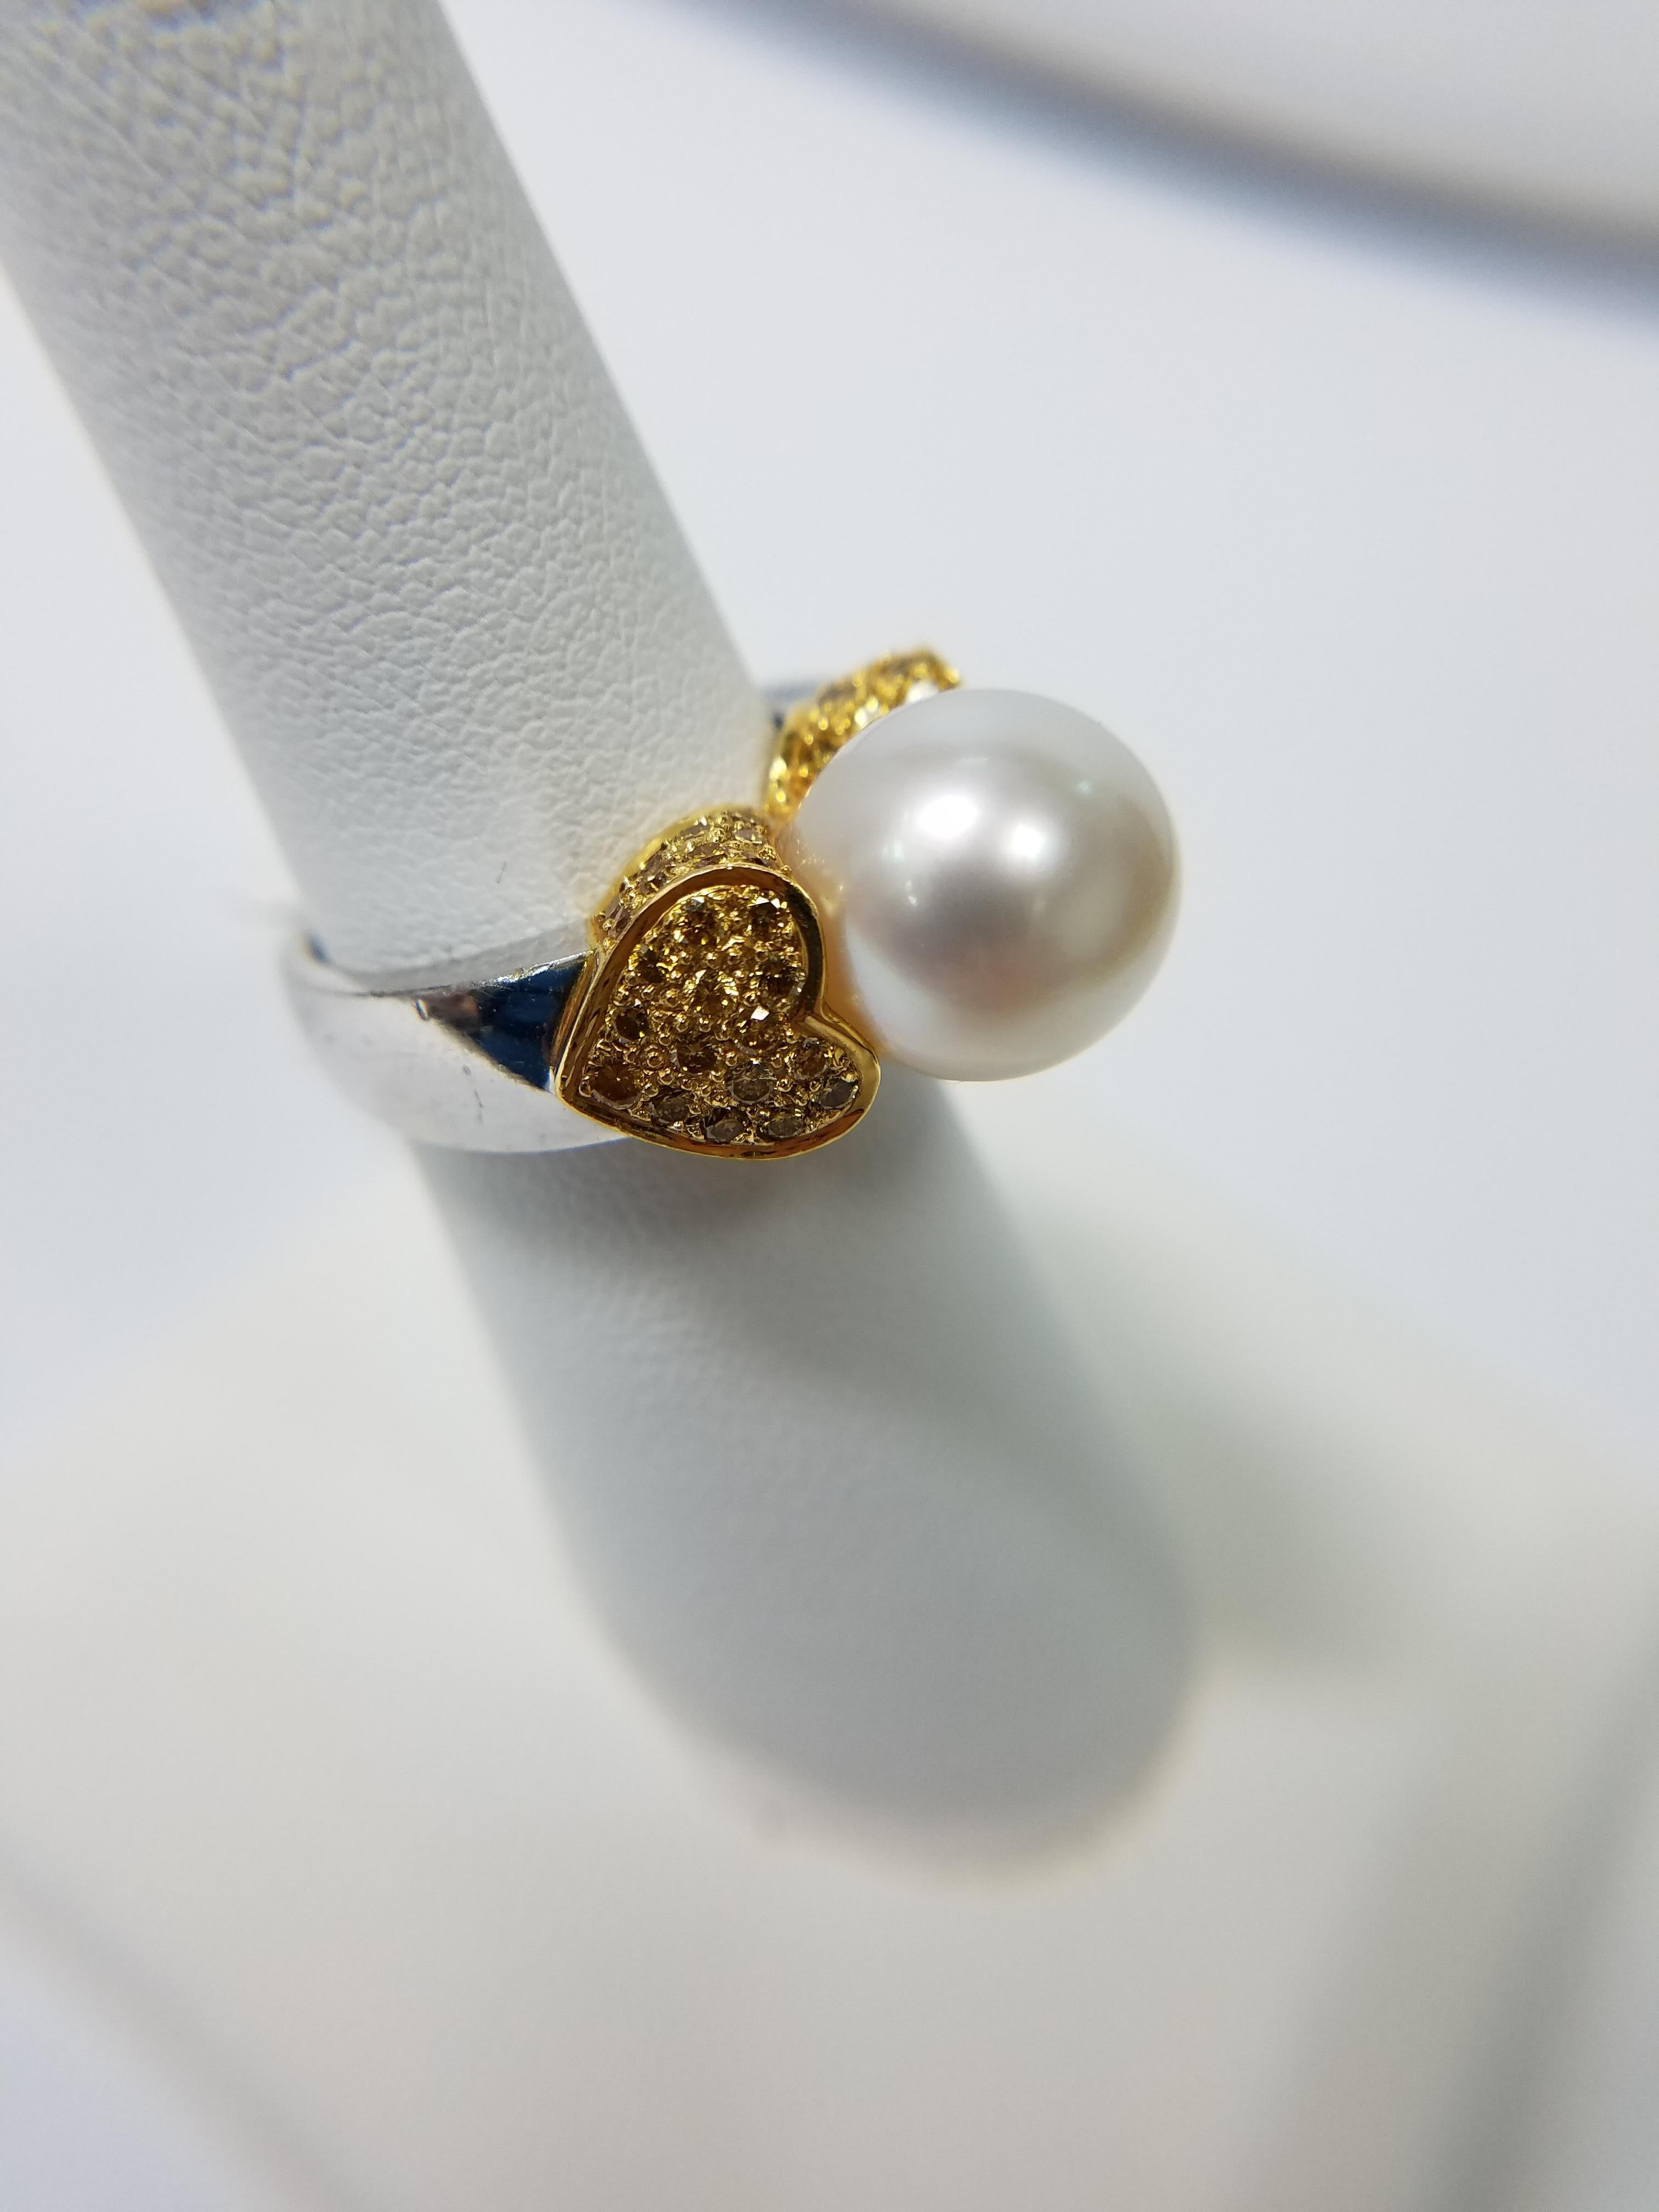 18K yellow and white gold ring with aprox 1.20 carats of Natural Fancy yellow Diamonds and a 11.55 mm South Sea Pearl